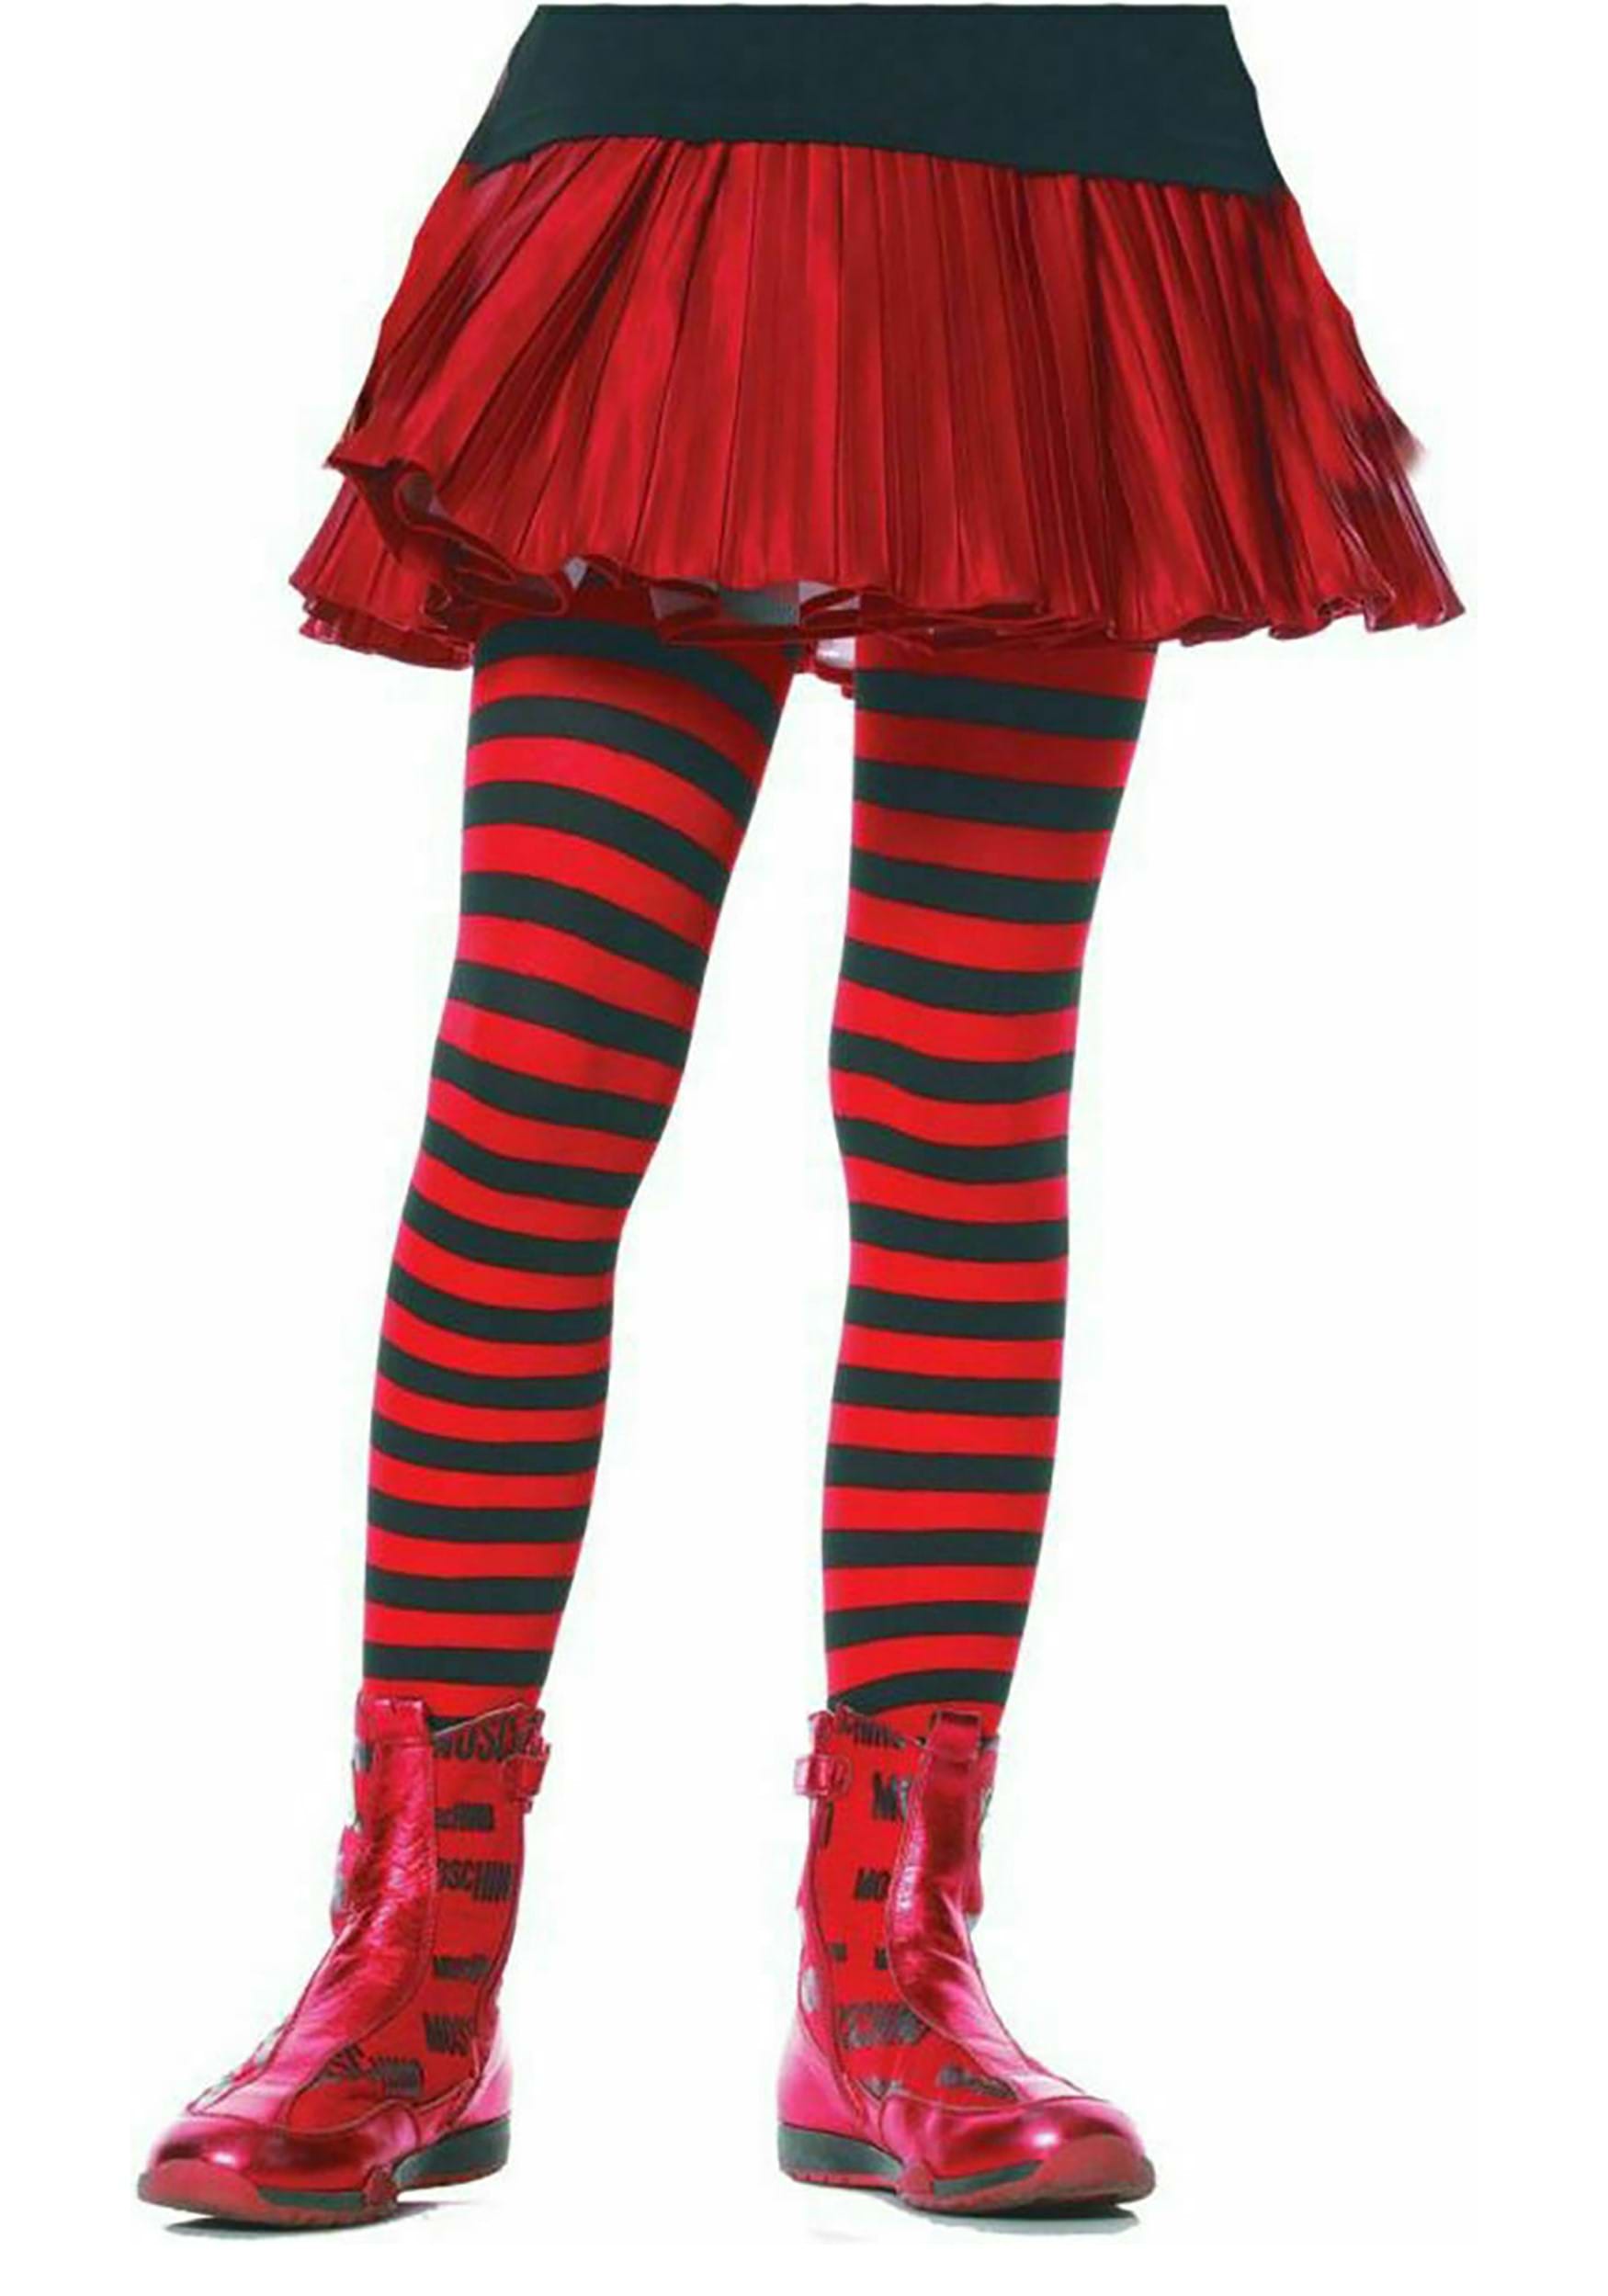 Kids Black Striped Tights in 20 Color Combos and 4 sizes! 